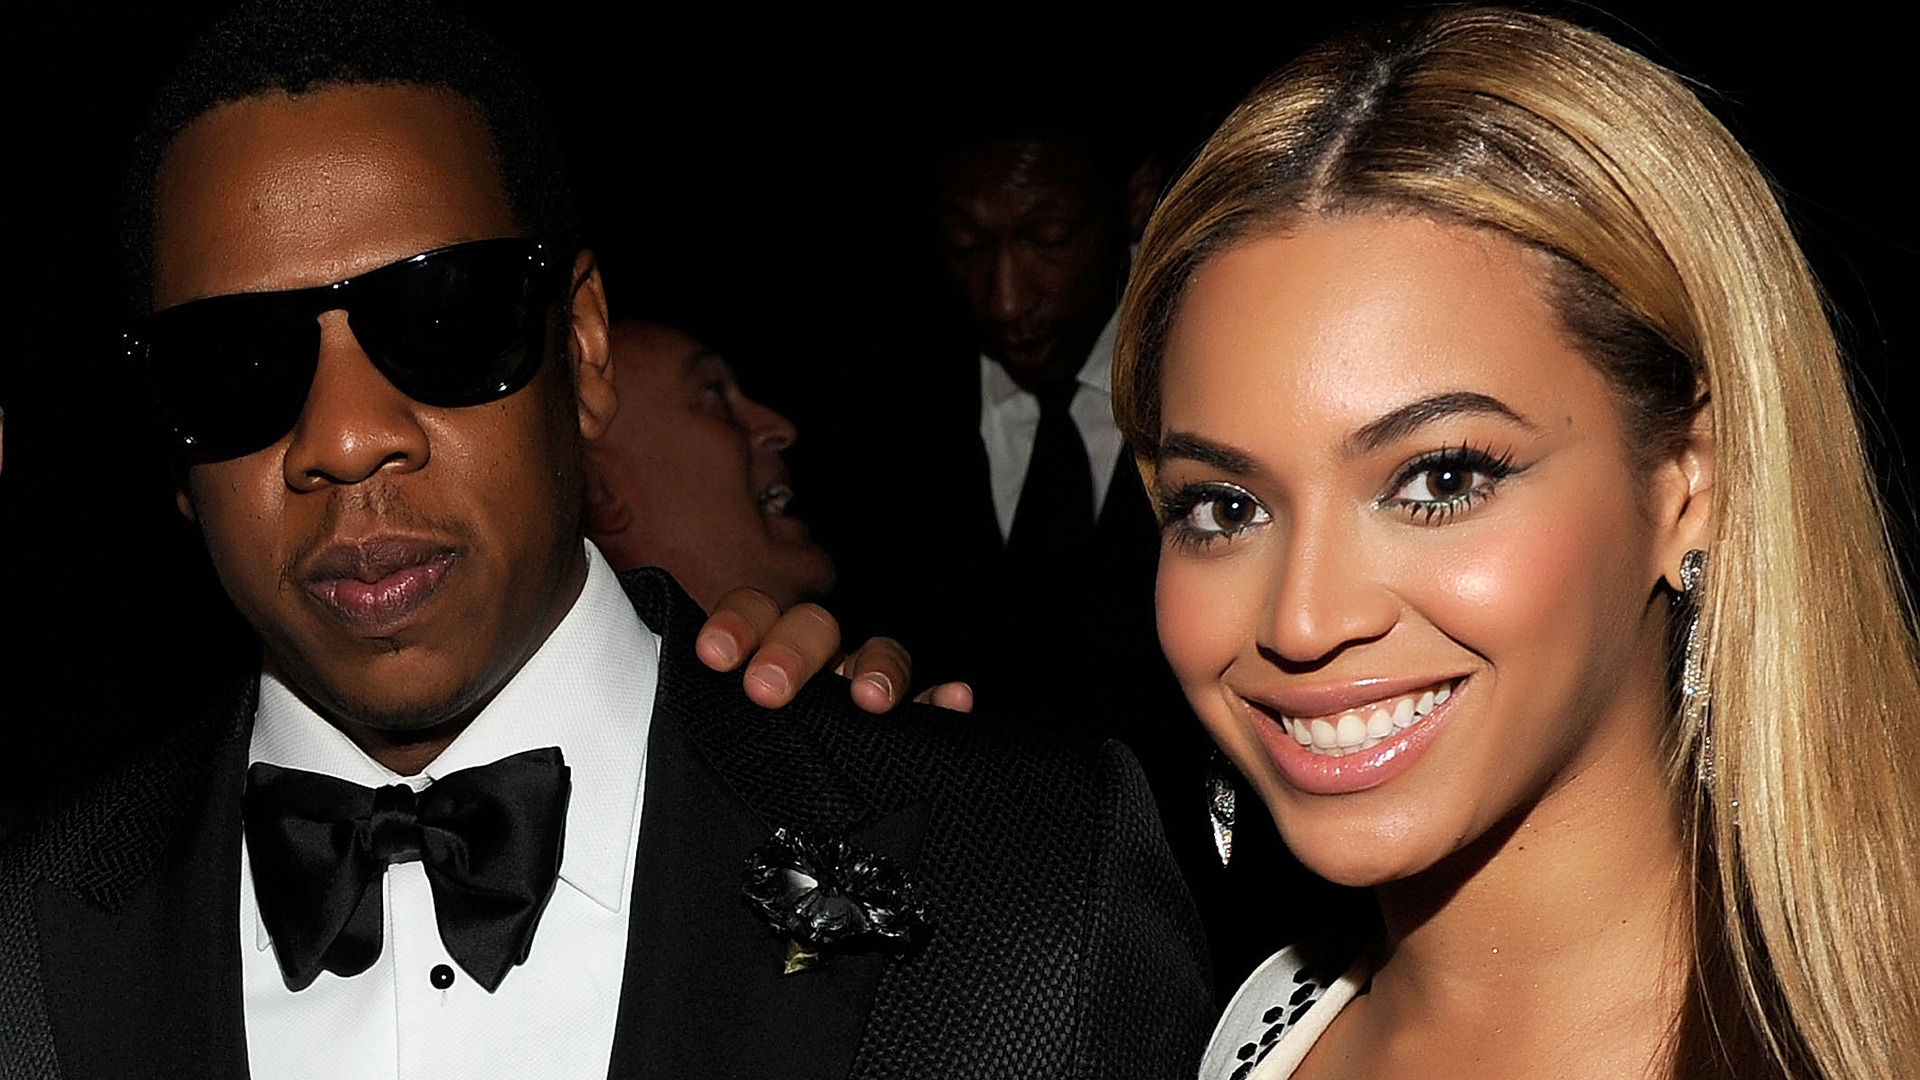 Jay Z and Beyonce for 1920 x 1080 HDTV 1080p resolution